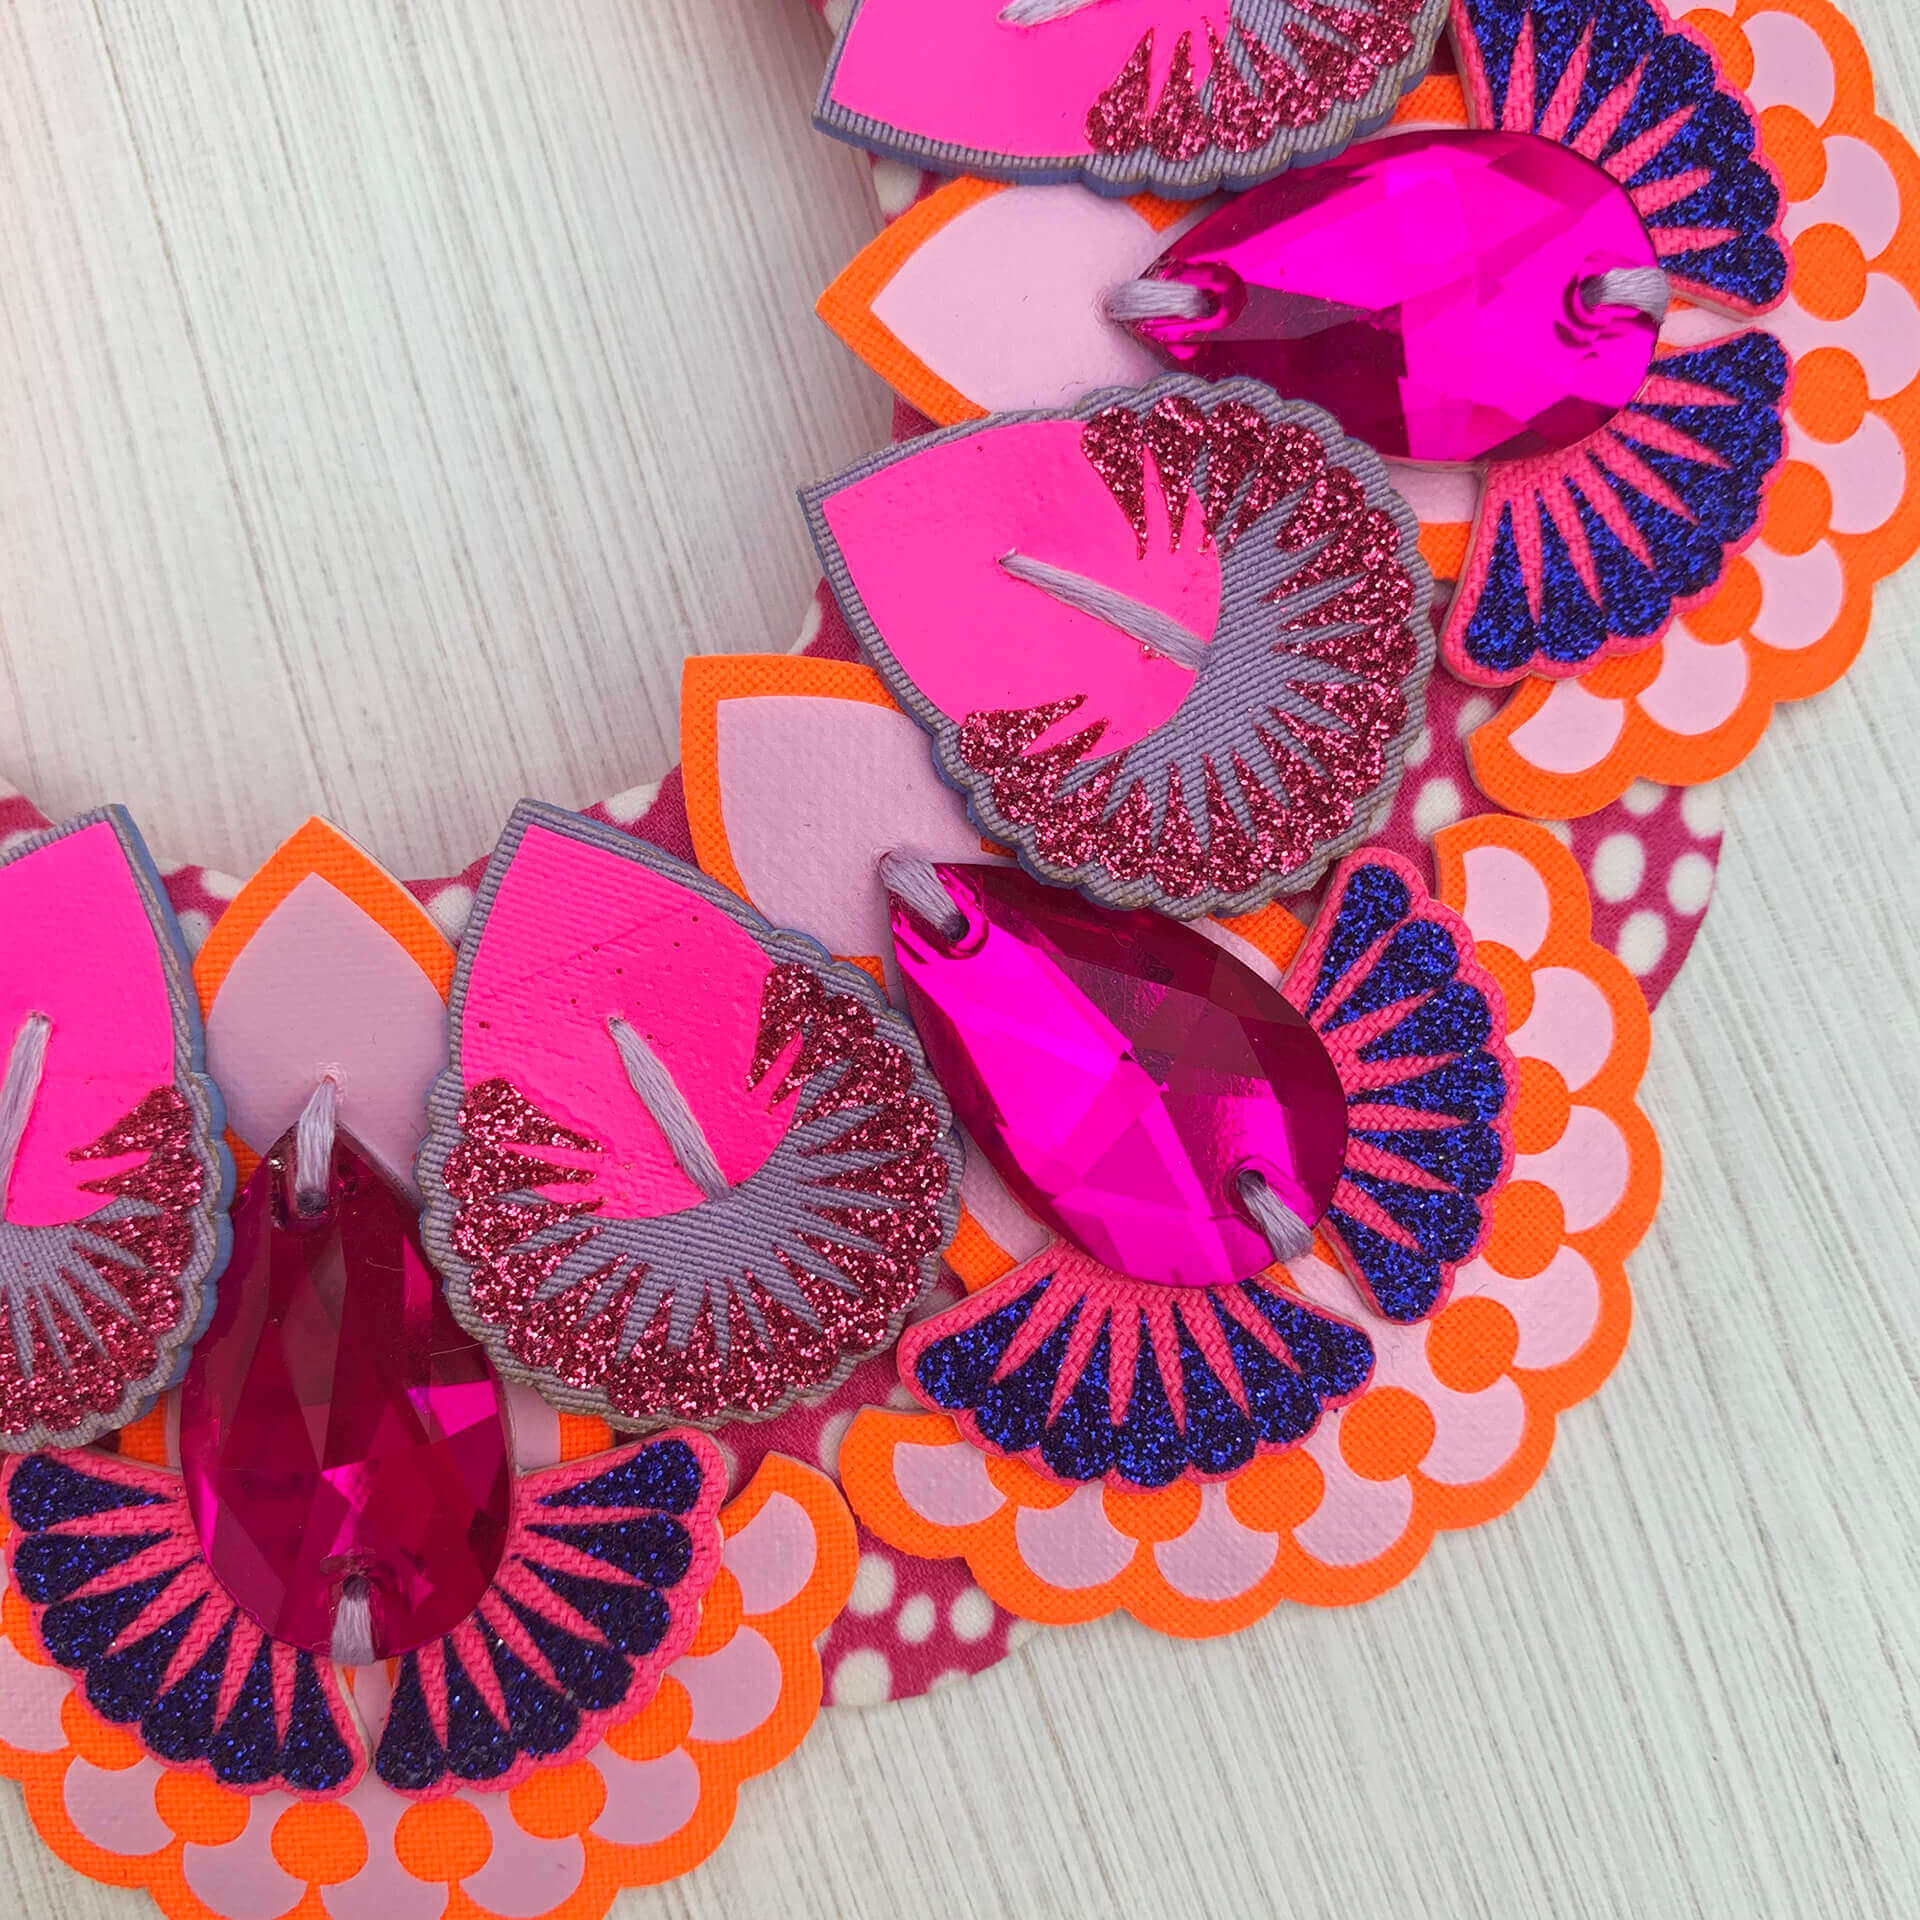 A close up of an ornately layered and printed Statement bib necklace. The lilac, glittery blue, pink and orange fabric layers are decorated with hot pink teardrop shaped jewels